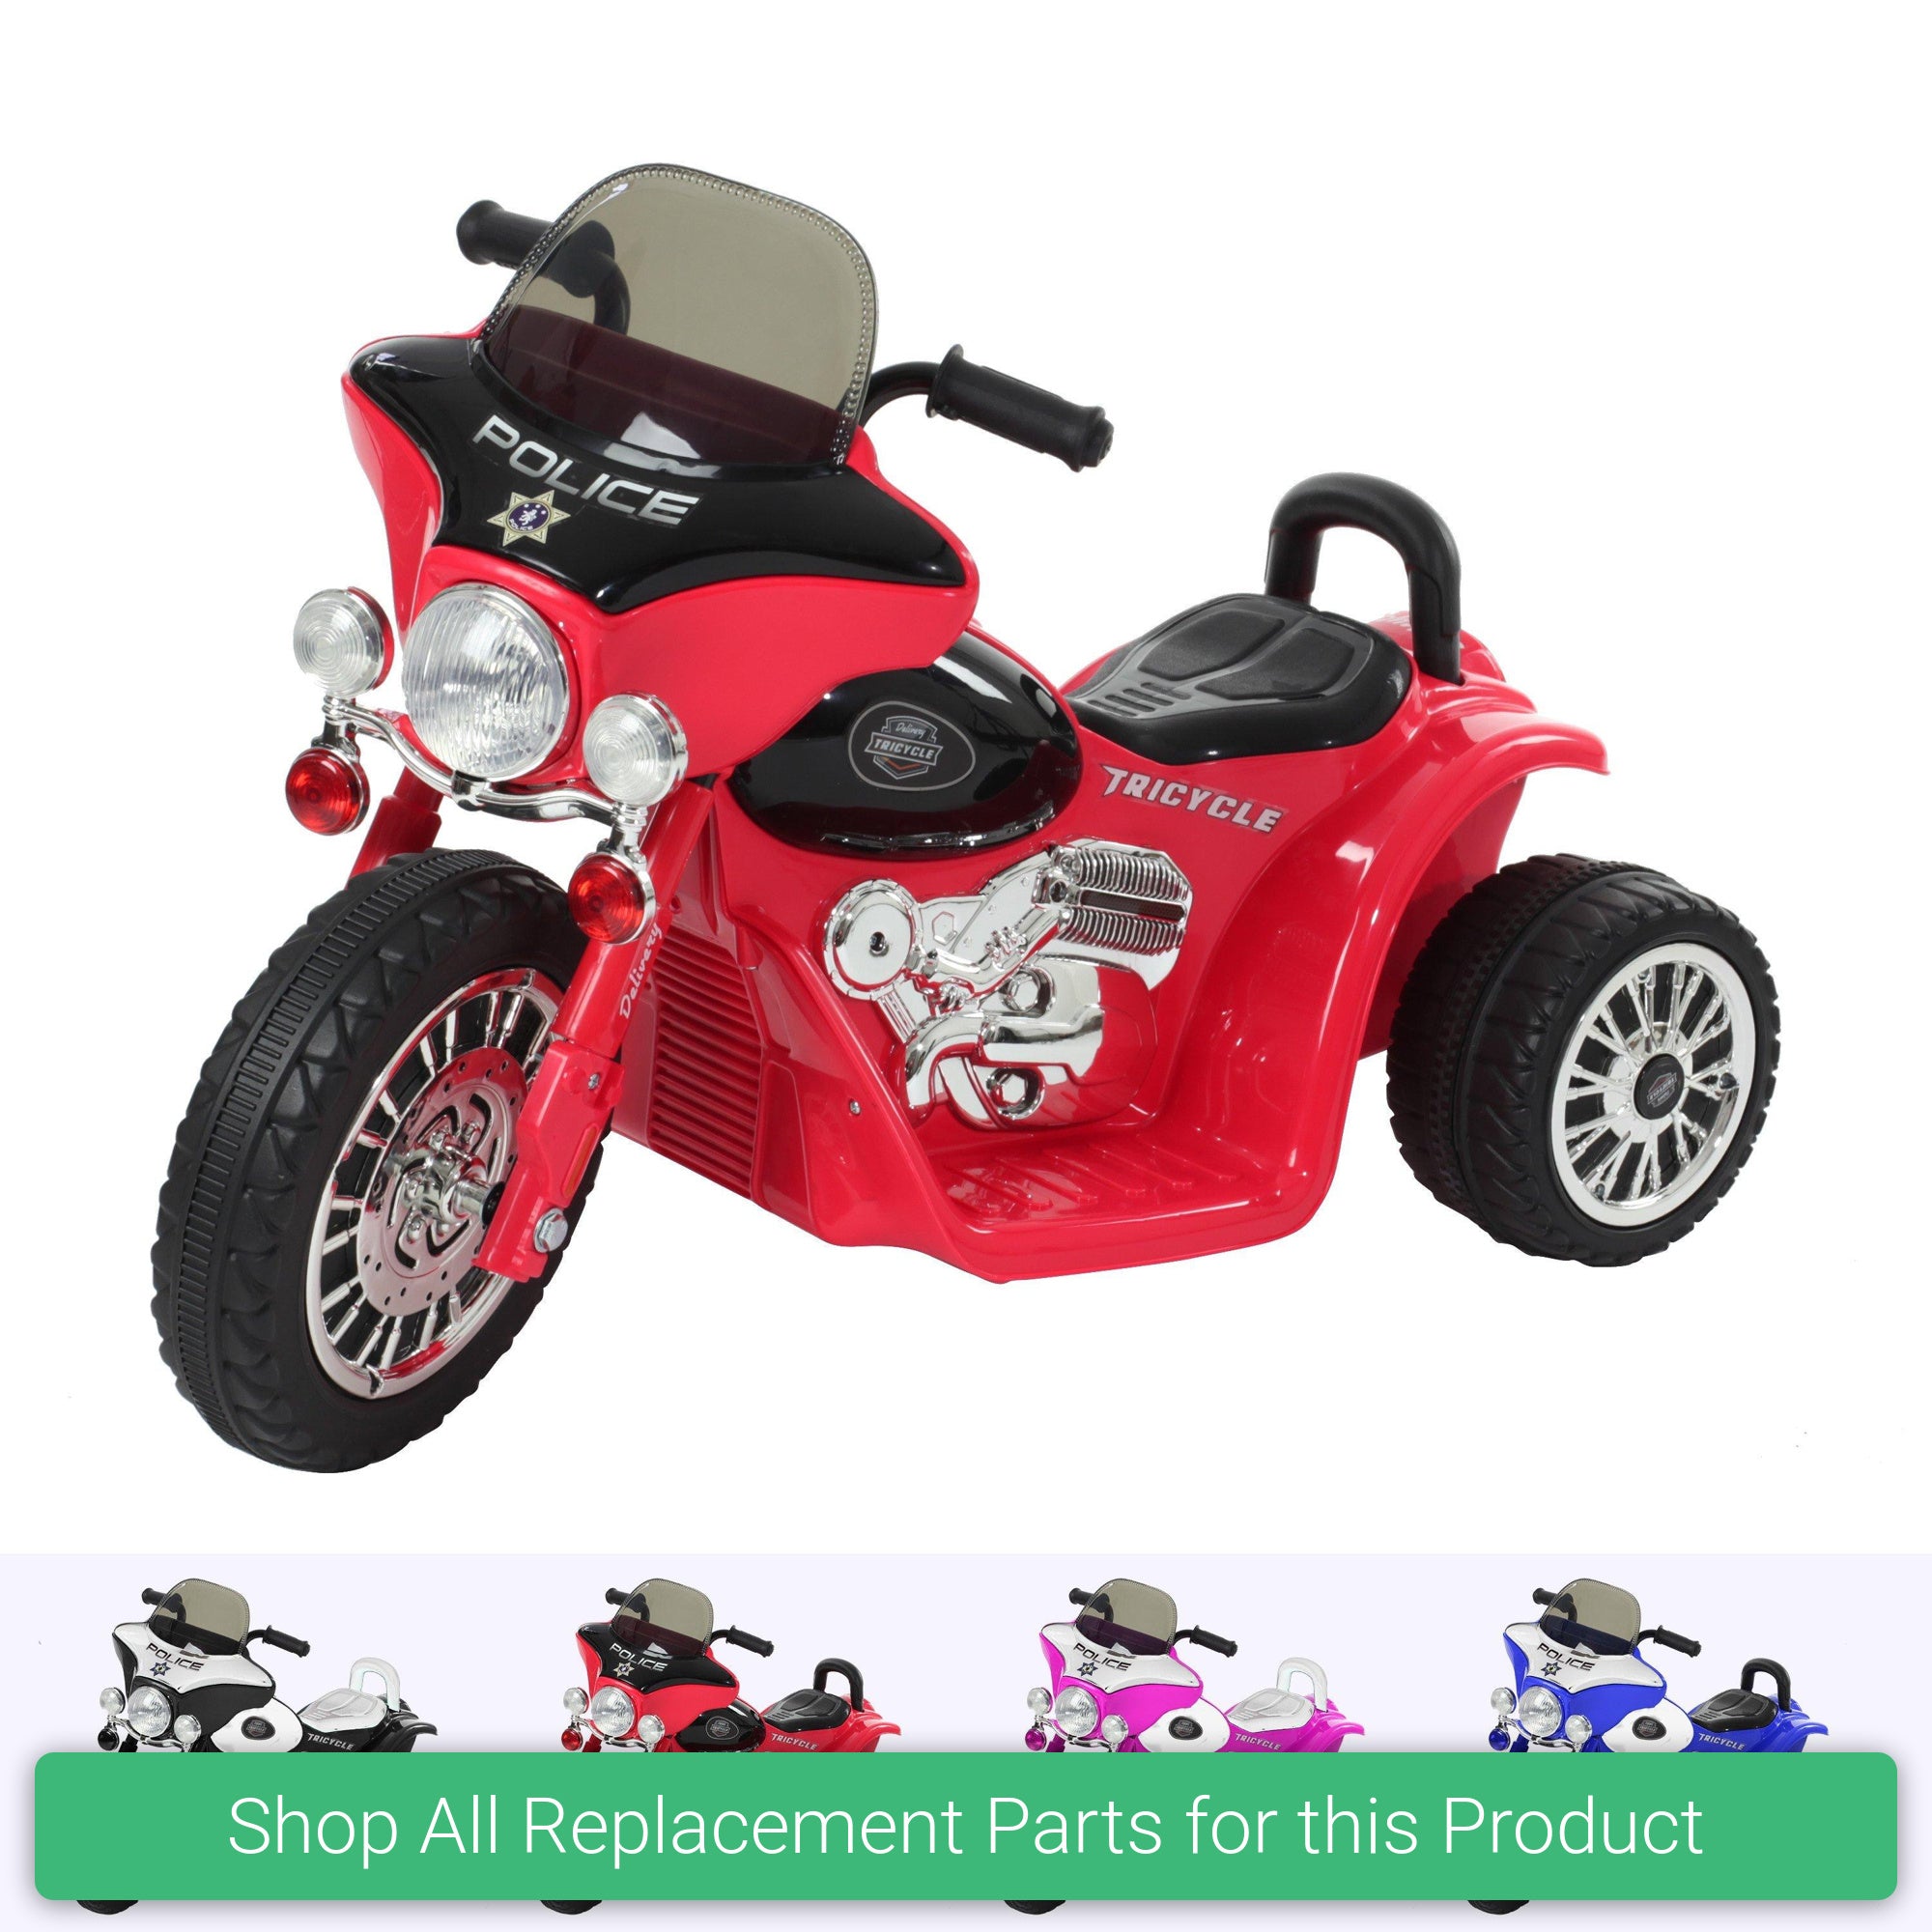 Replacement Parts and Spares for Kids Harley Style Bike - POLBIK-20161 - JT568